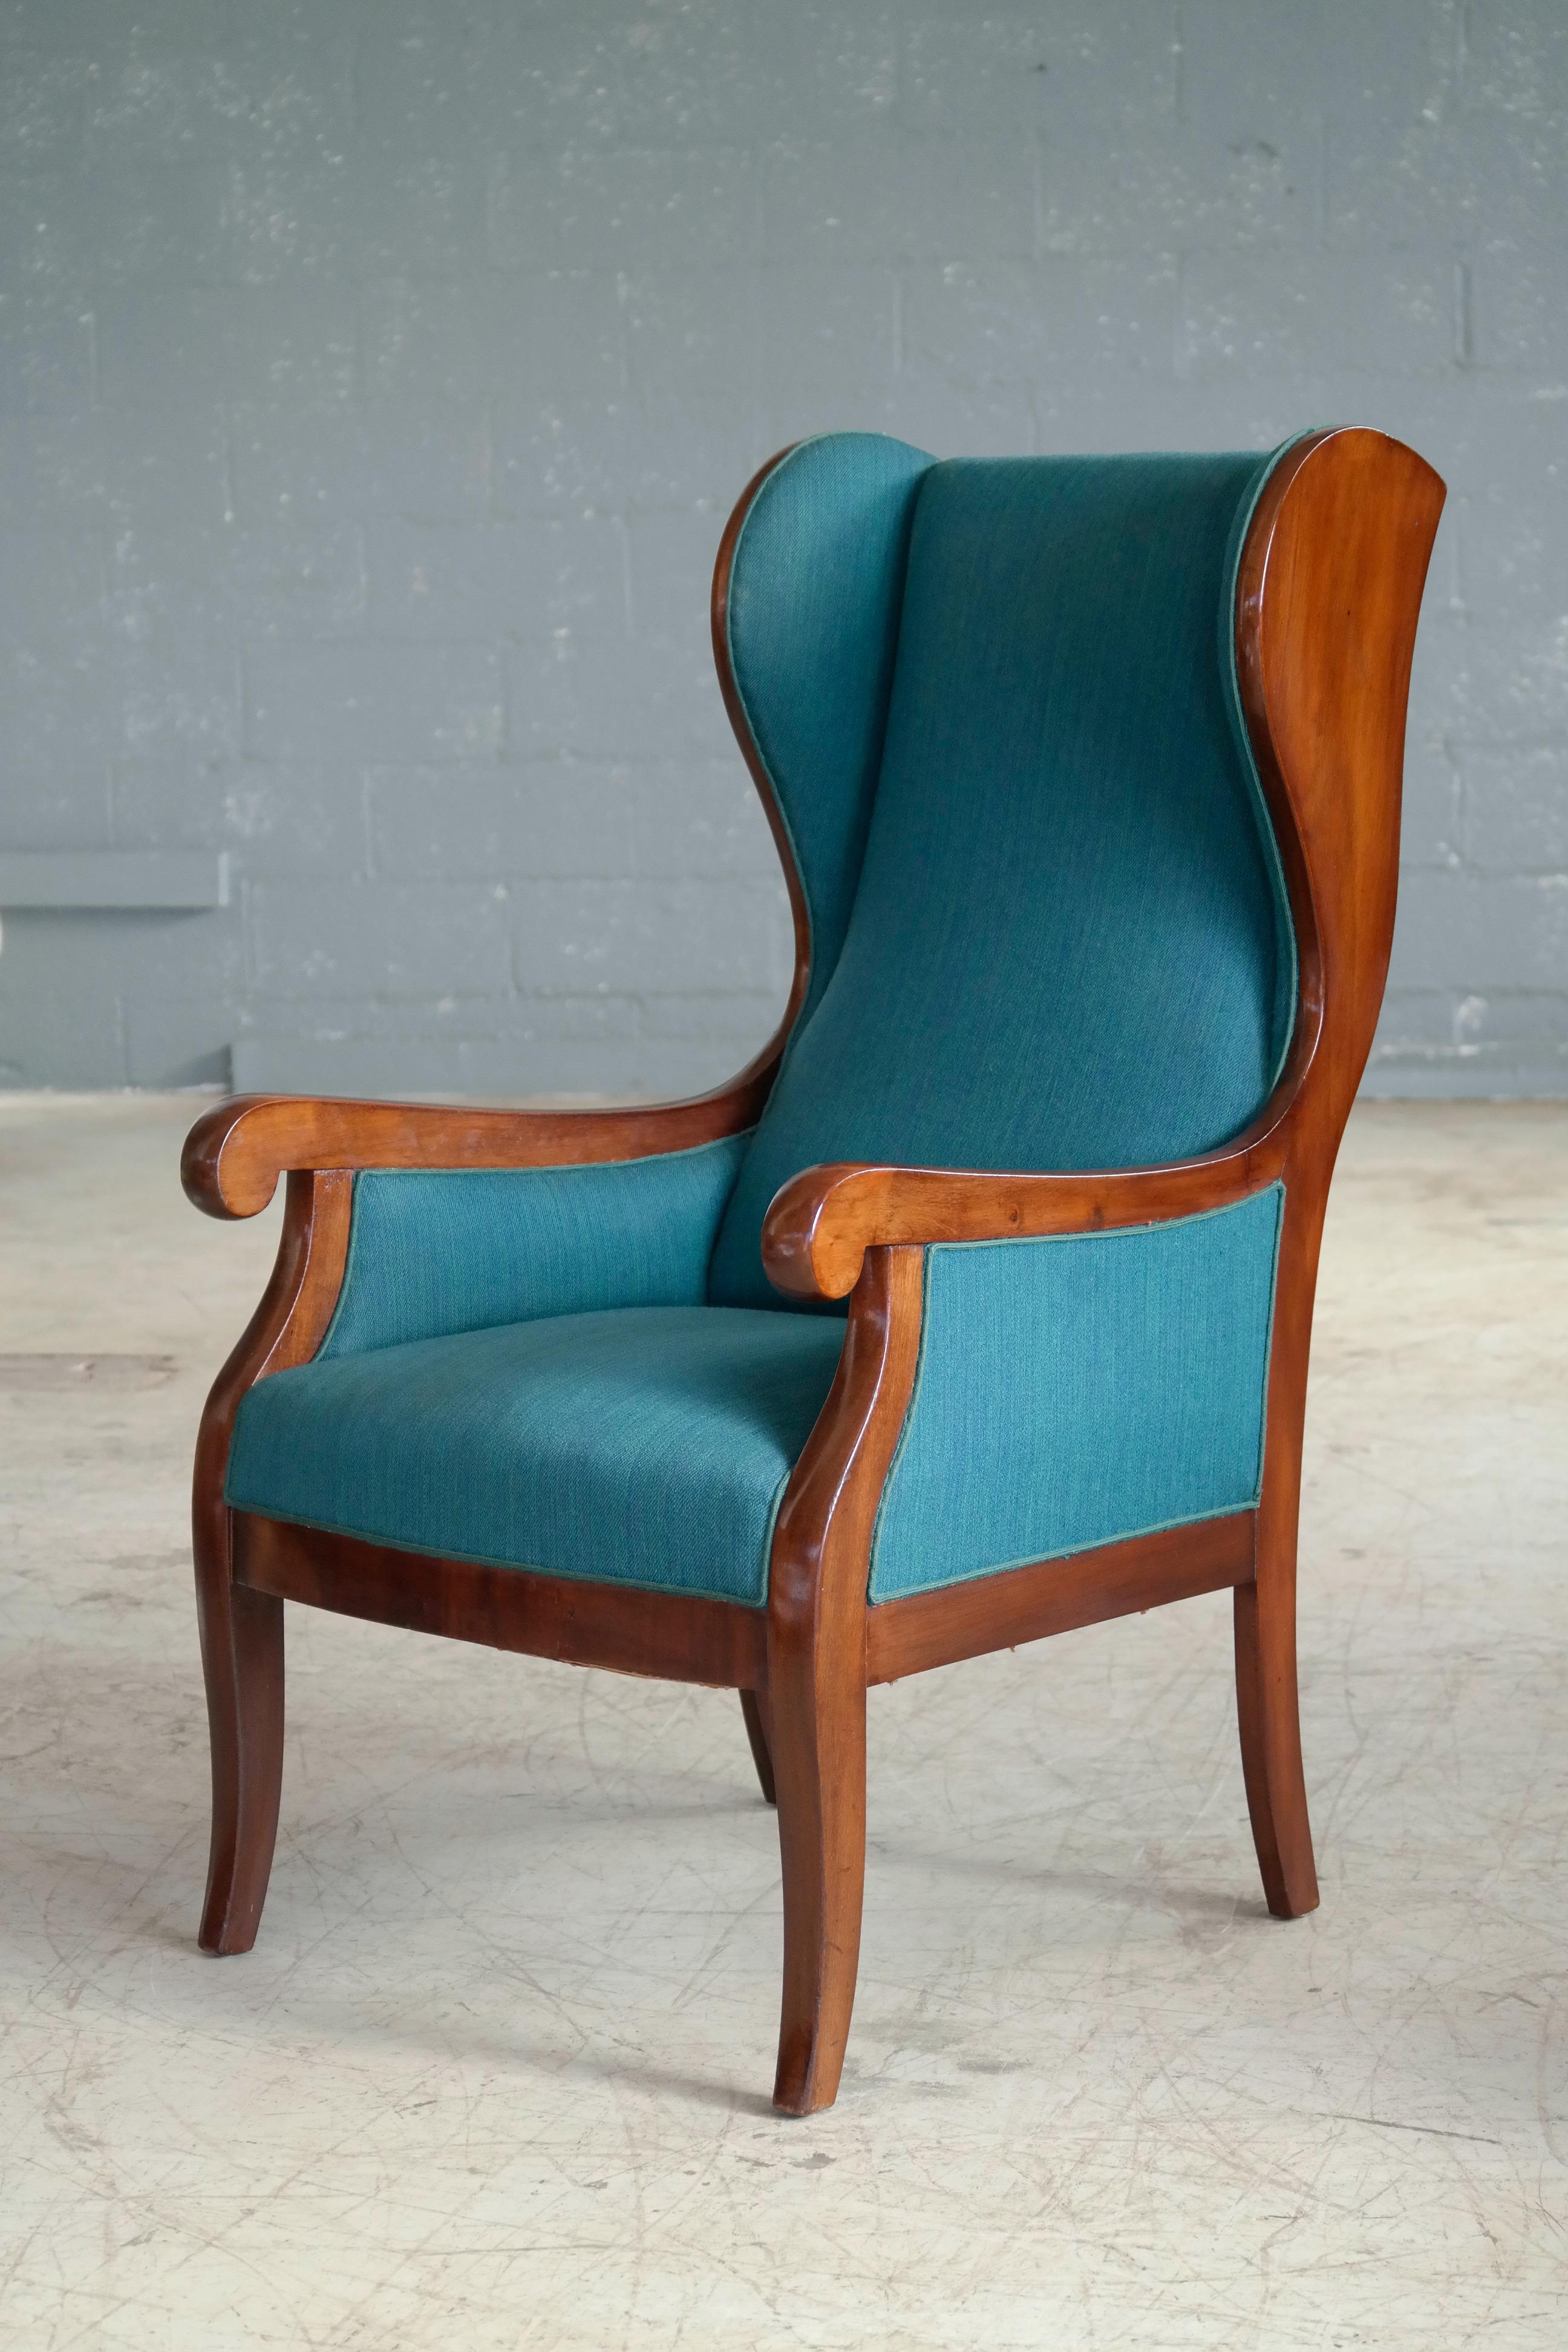 Beautiful classic 1930s-1940s solid mahogany and wool wingback chair produced by Master Cabinetmaker Frits Henningsen, Denmark. Very elegant design that fits superbly into any modern design making a strong yet refined statement. Excellent conditions